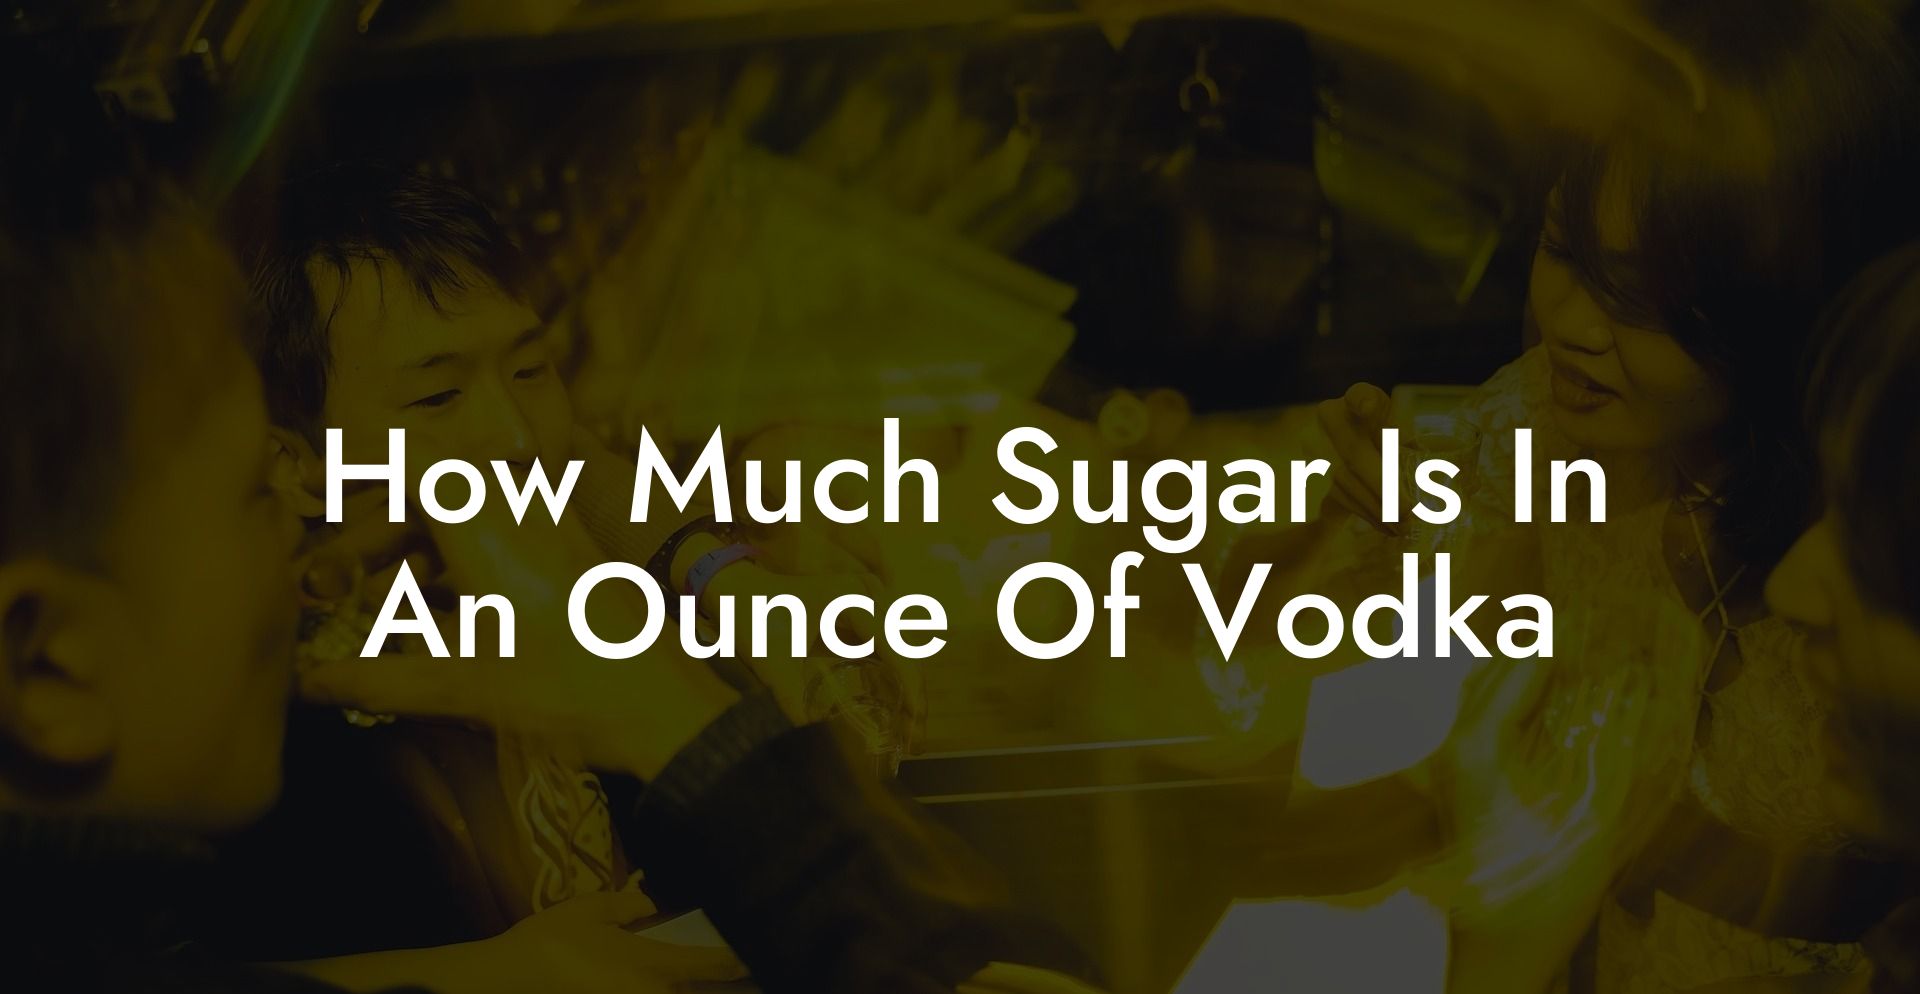 How Much Sugar Is In An Ounce Of Vodka